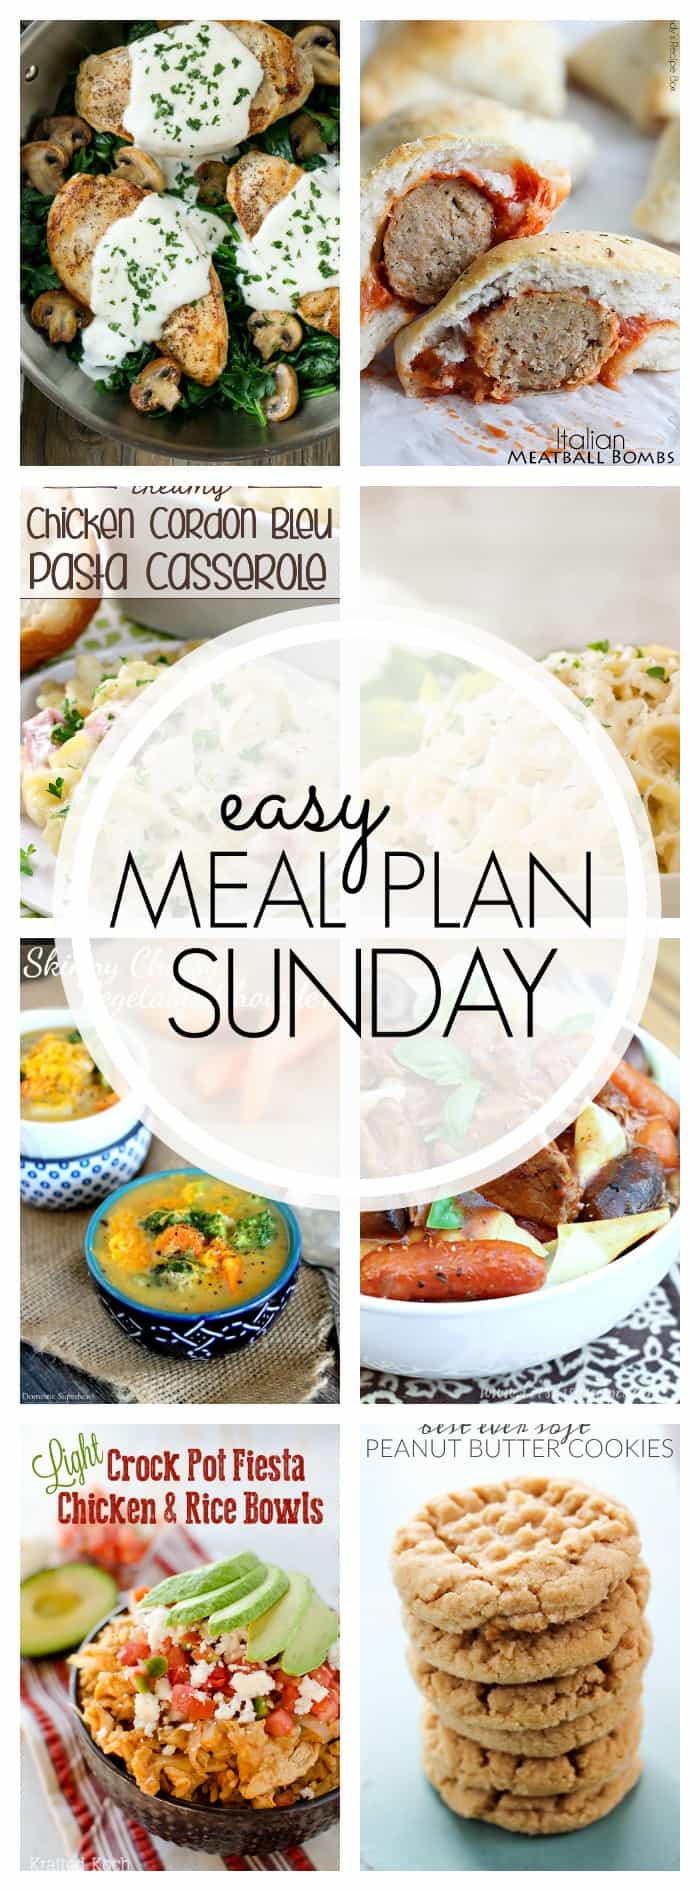 Easy Meal Plan Sunday Week 81 - 365 Days of Baking and More